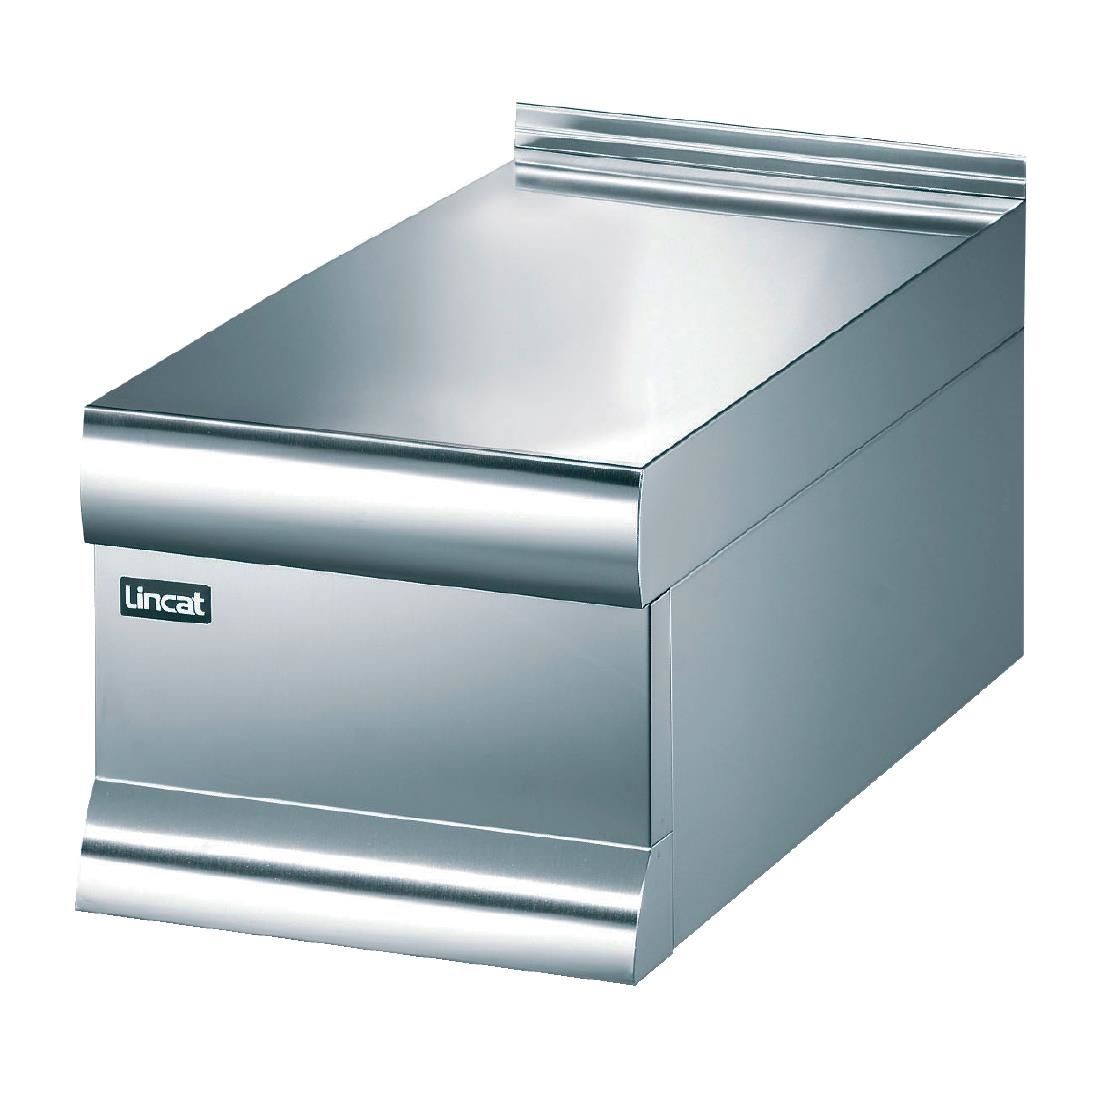 E563 Lincat Silverlink 600 Worktop Without Drawer JD Catering Equipment Solutions Ltd